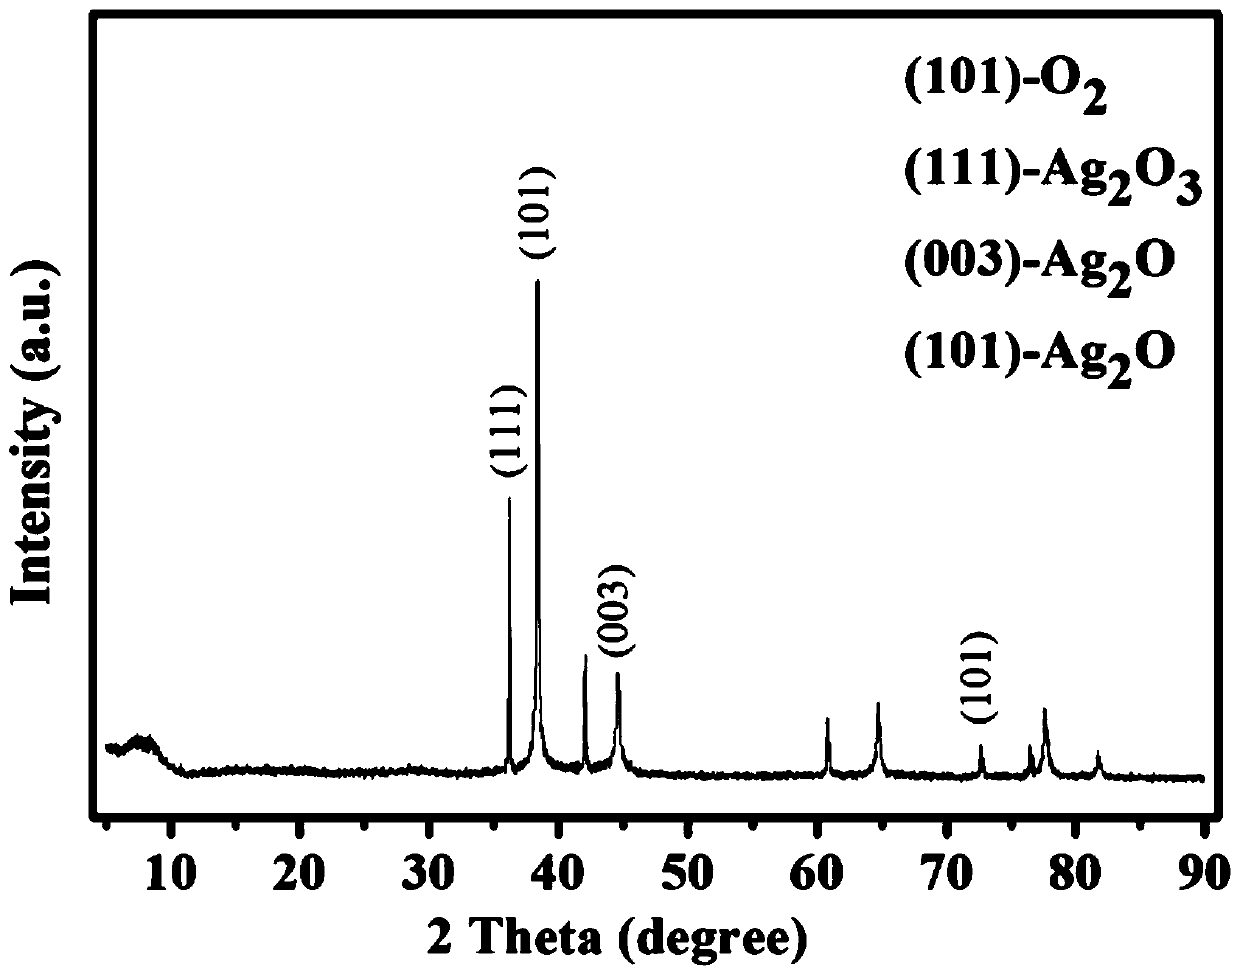 Adsorbent for removing radioactive iodine ions and application of adsorbent